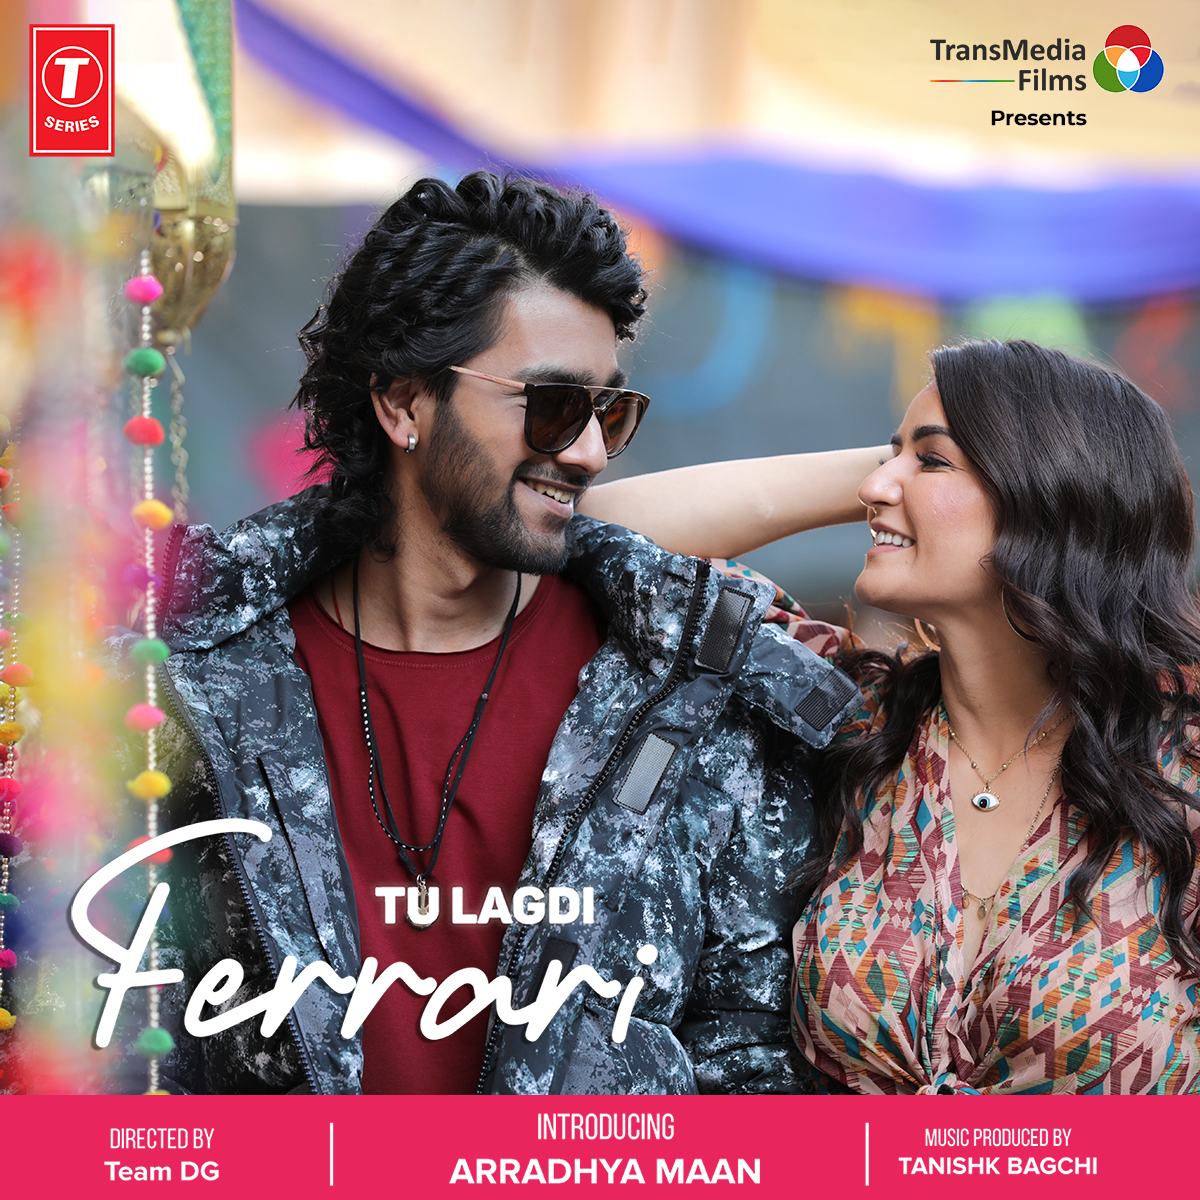 Get ready for the ultimate musical ride of the year. Celebrate New Year with #ArradhyaMaan with his new single #TuLagdiFerrari out now on @TSeries youtu.be/Pdp3ufo9HlA @tanishkbagchi @AseesKaur @TSeries #AmyAela @MainHoonRomy @directorgifty @TransMediaFin #TransMediaFilms